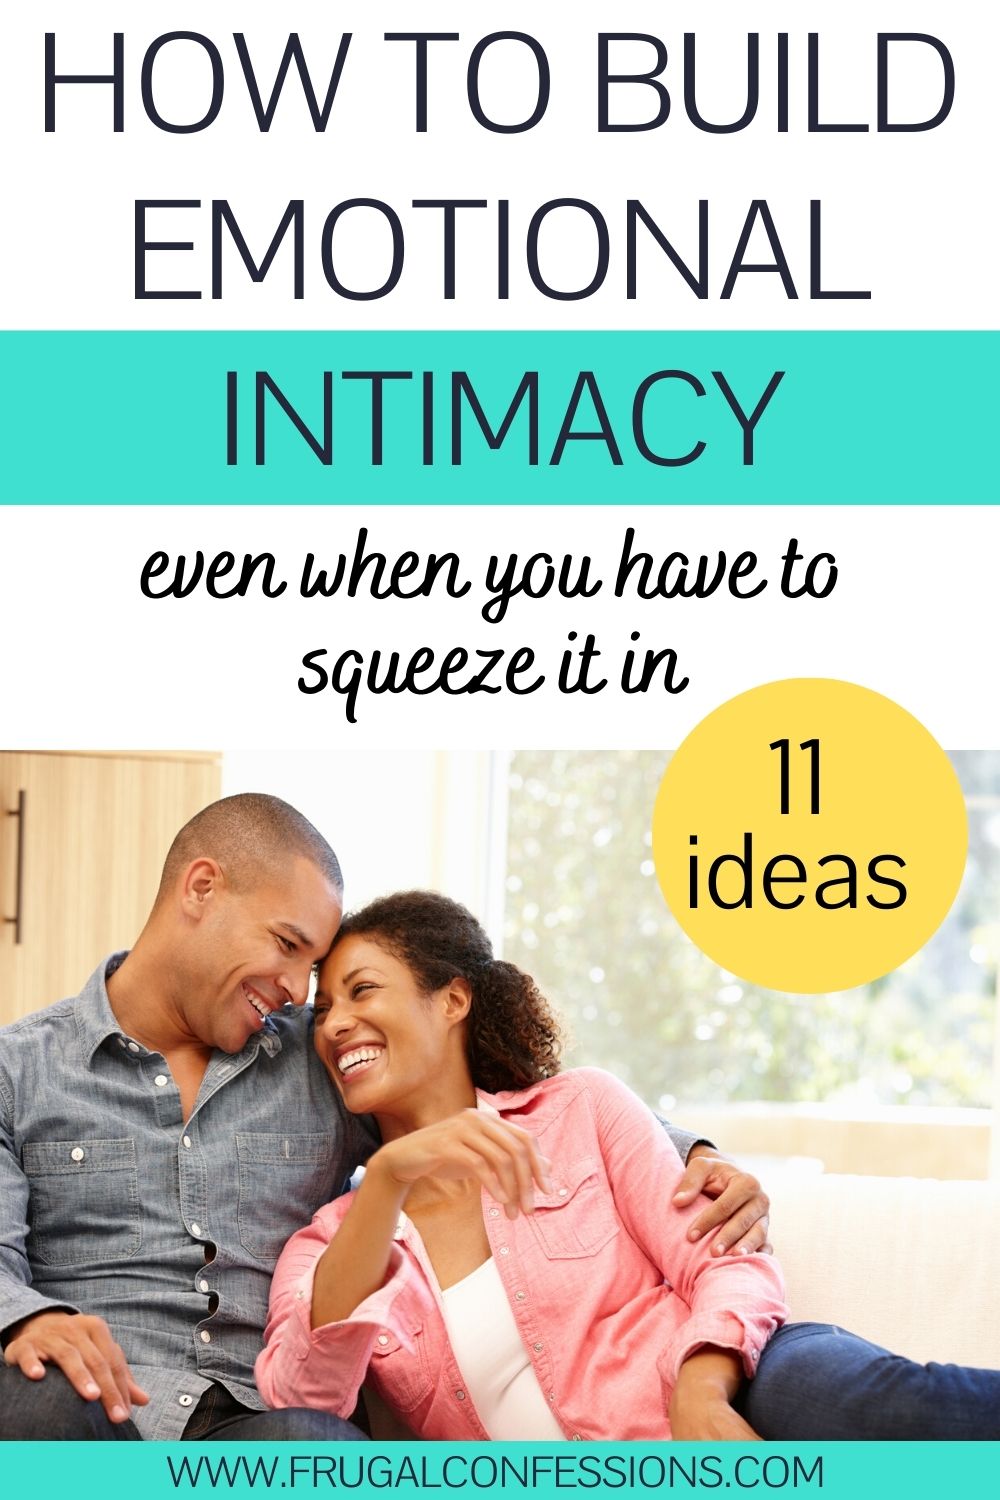 couple smiling on couch, text overlay "how to build emotional intimacy, 11 ideas"